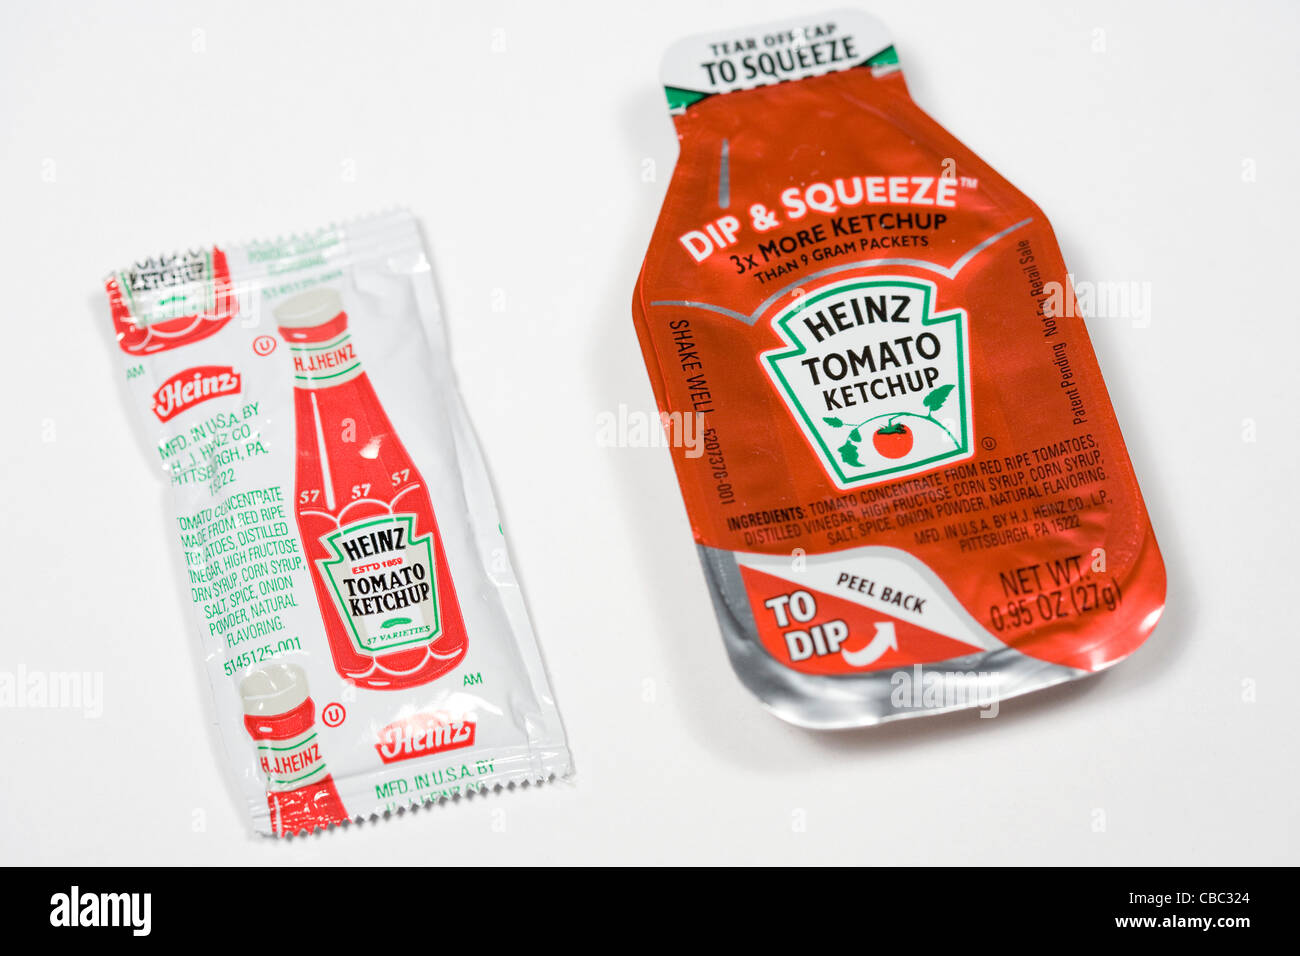 The new style of Heinz Ketchup packets.  Stock Photo